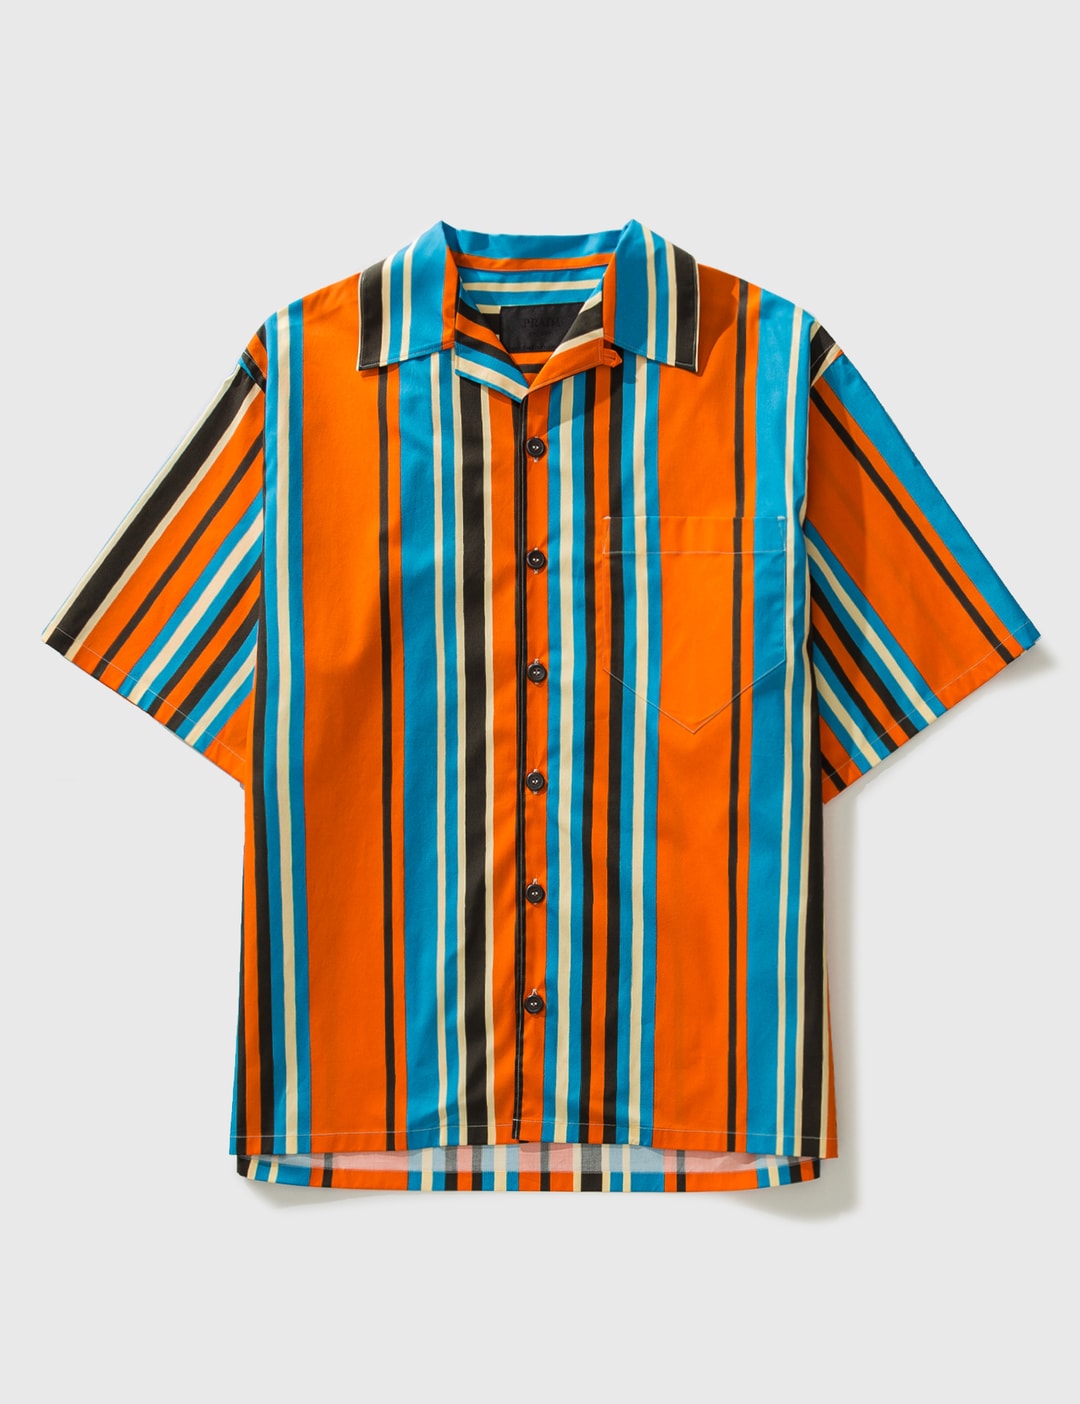 Prada - Bayadere Shirt | HBX - Globally Curated Fashion and Lifestyle by  Hypebeast